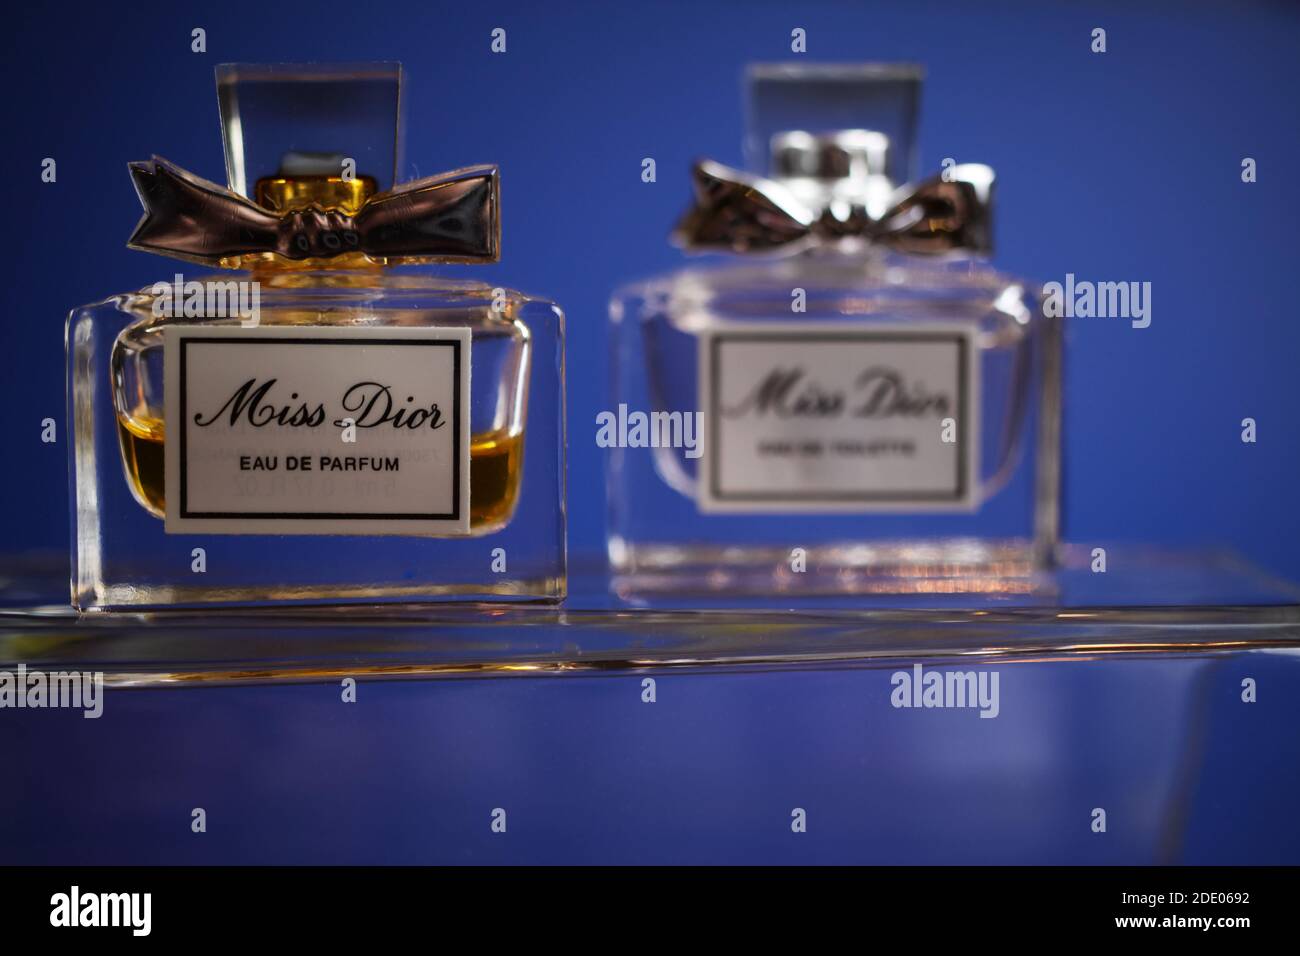 2,209 Dior Perfume Images, Stock Photos, 3D objects, & Vectors